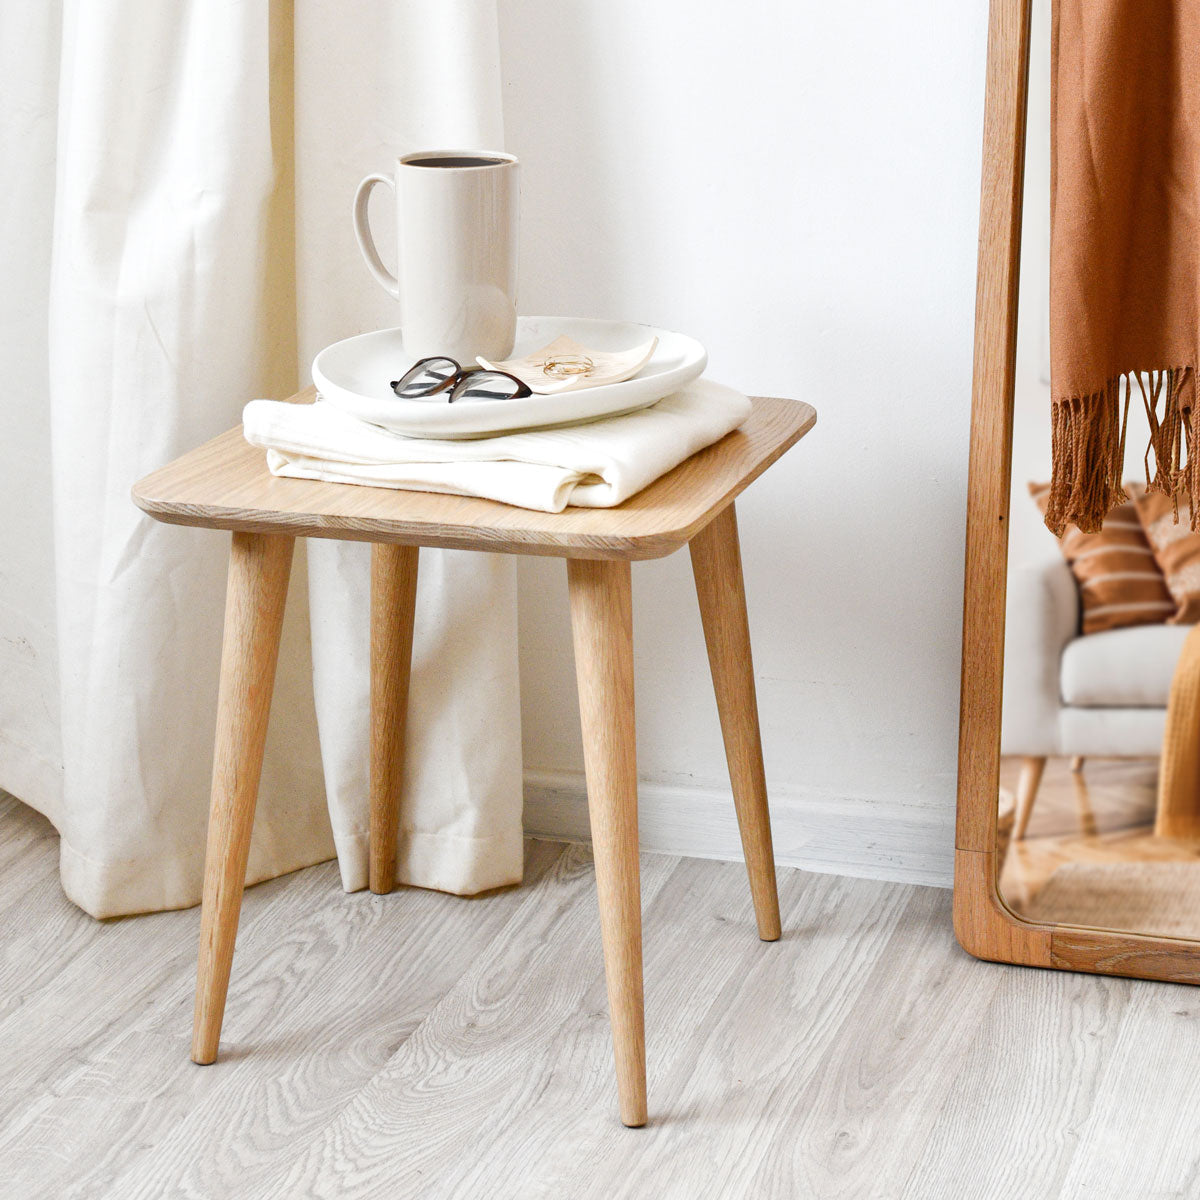 Styling your side table